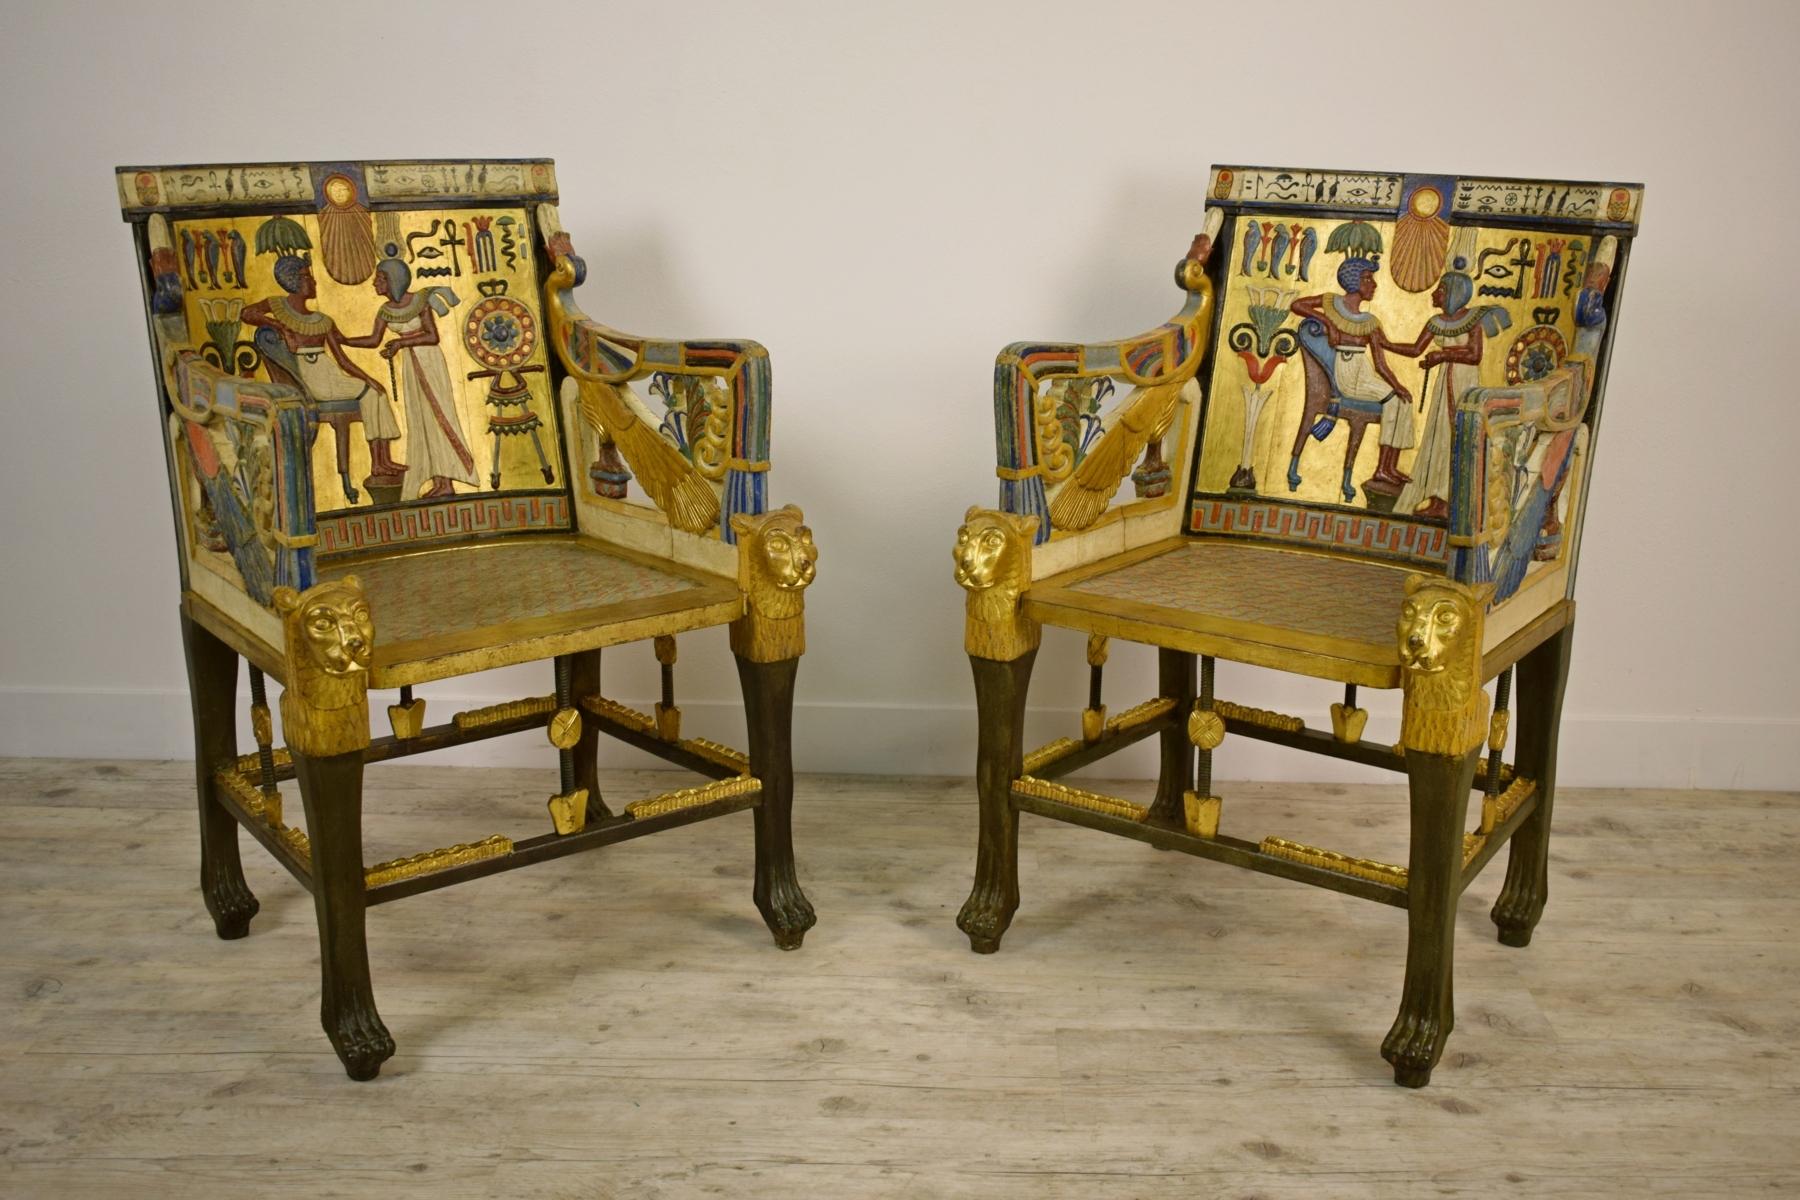 20th Century, Pair of Lacquered Giltwood Armchairs in Egyptian revival style

This particular pair of armchairs, made of carved wood, lacquered and golden, is very bright and decorative. The armchairs can be placed in any furnishing context as they